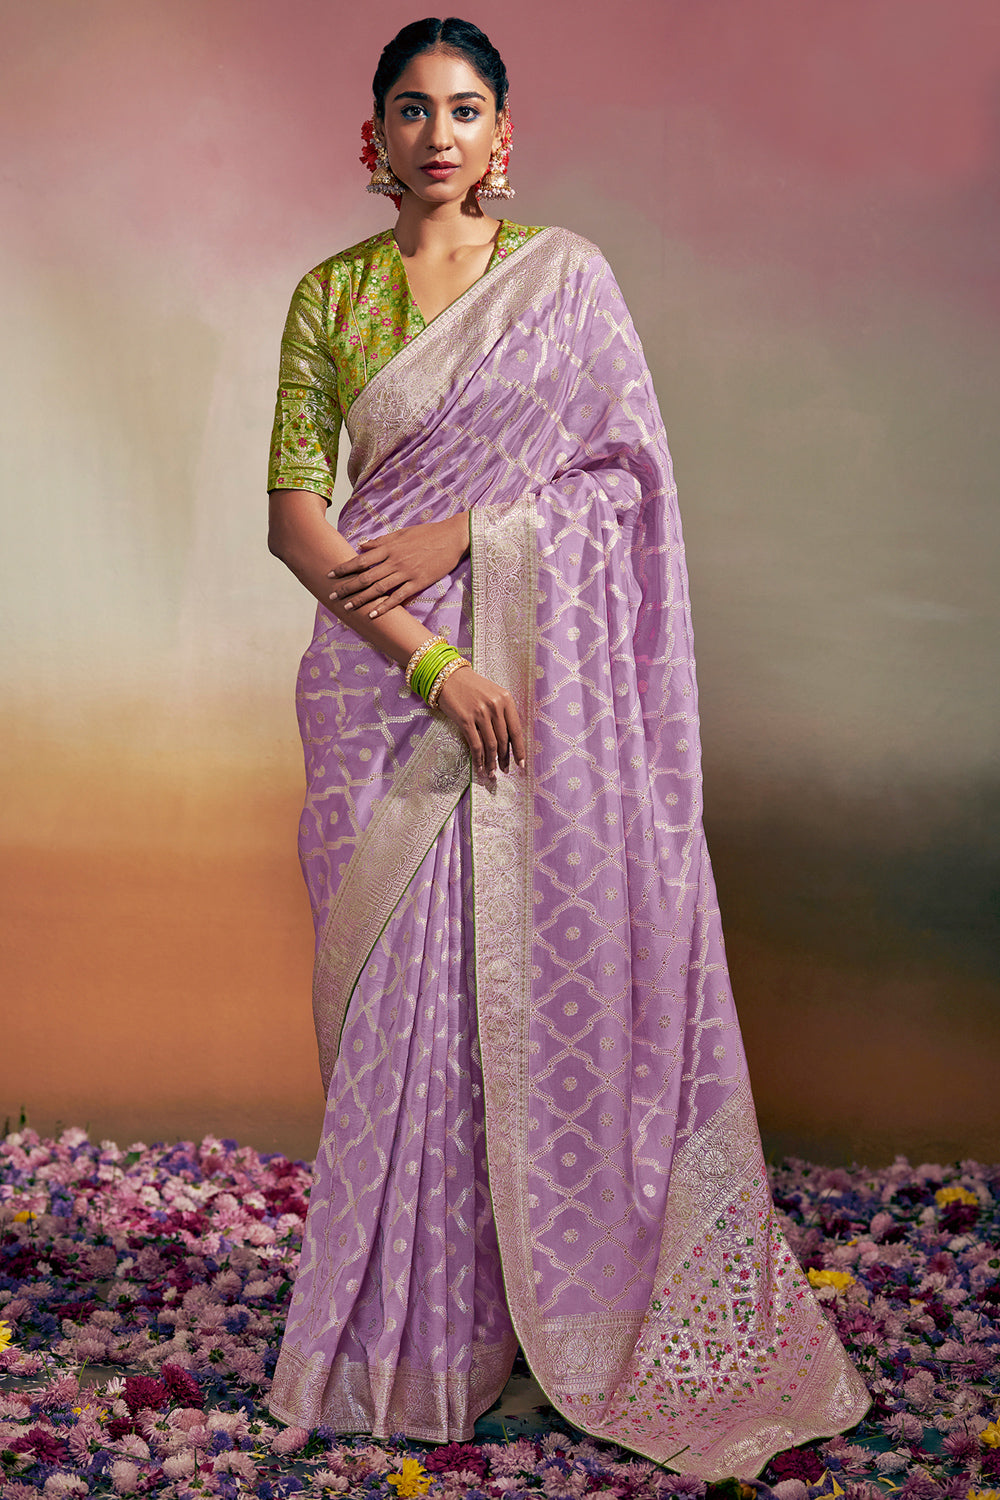 Nisha Aggarwal ups her style game in a pastel purple saree gown!